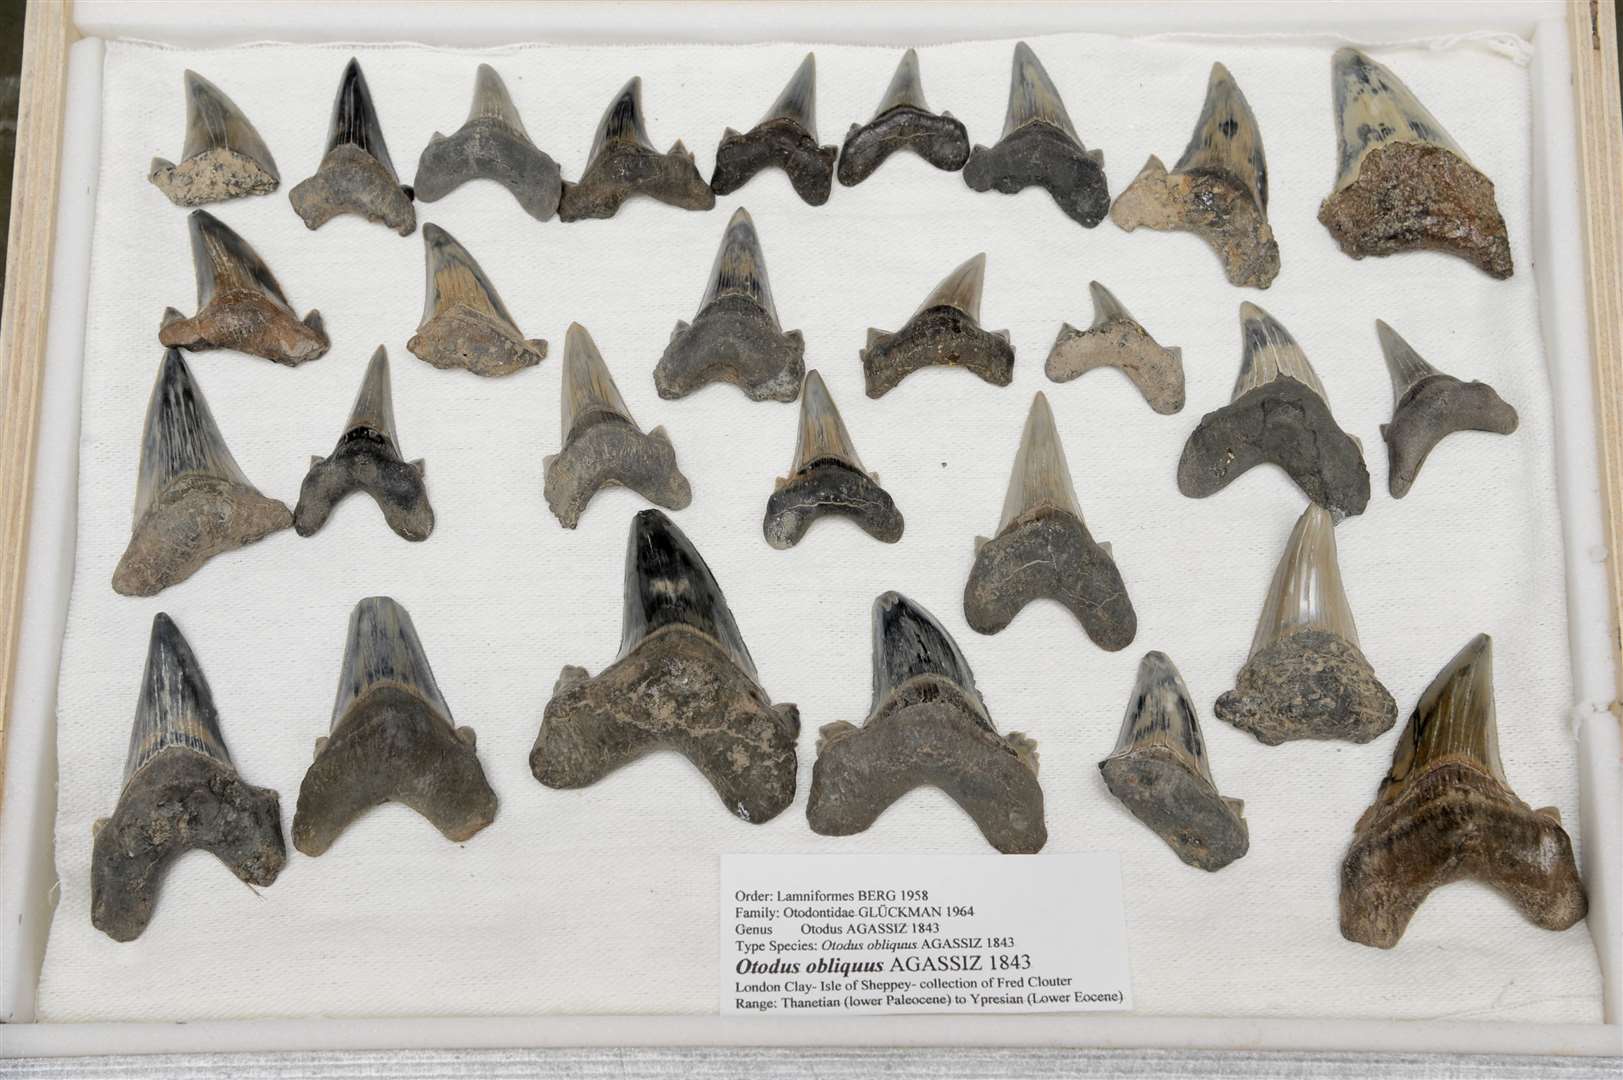 Shark teeth found by Fred Clouter on Sheppey Picture: Andy Payton